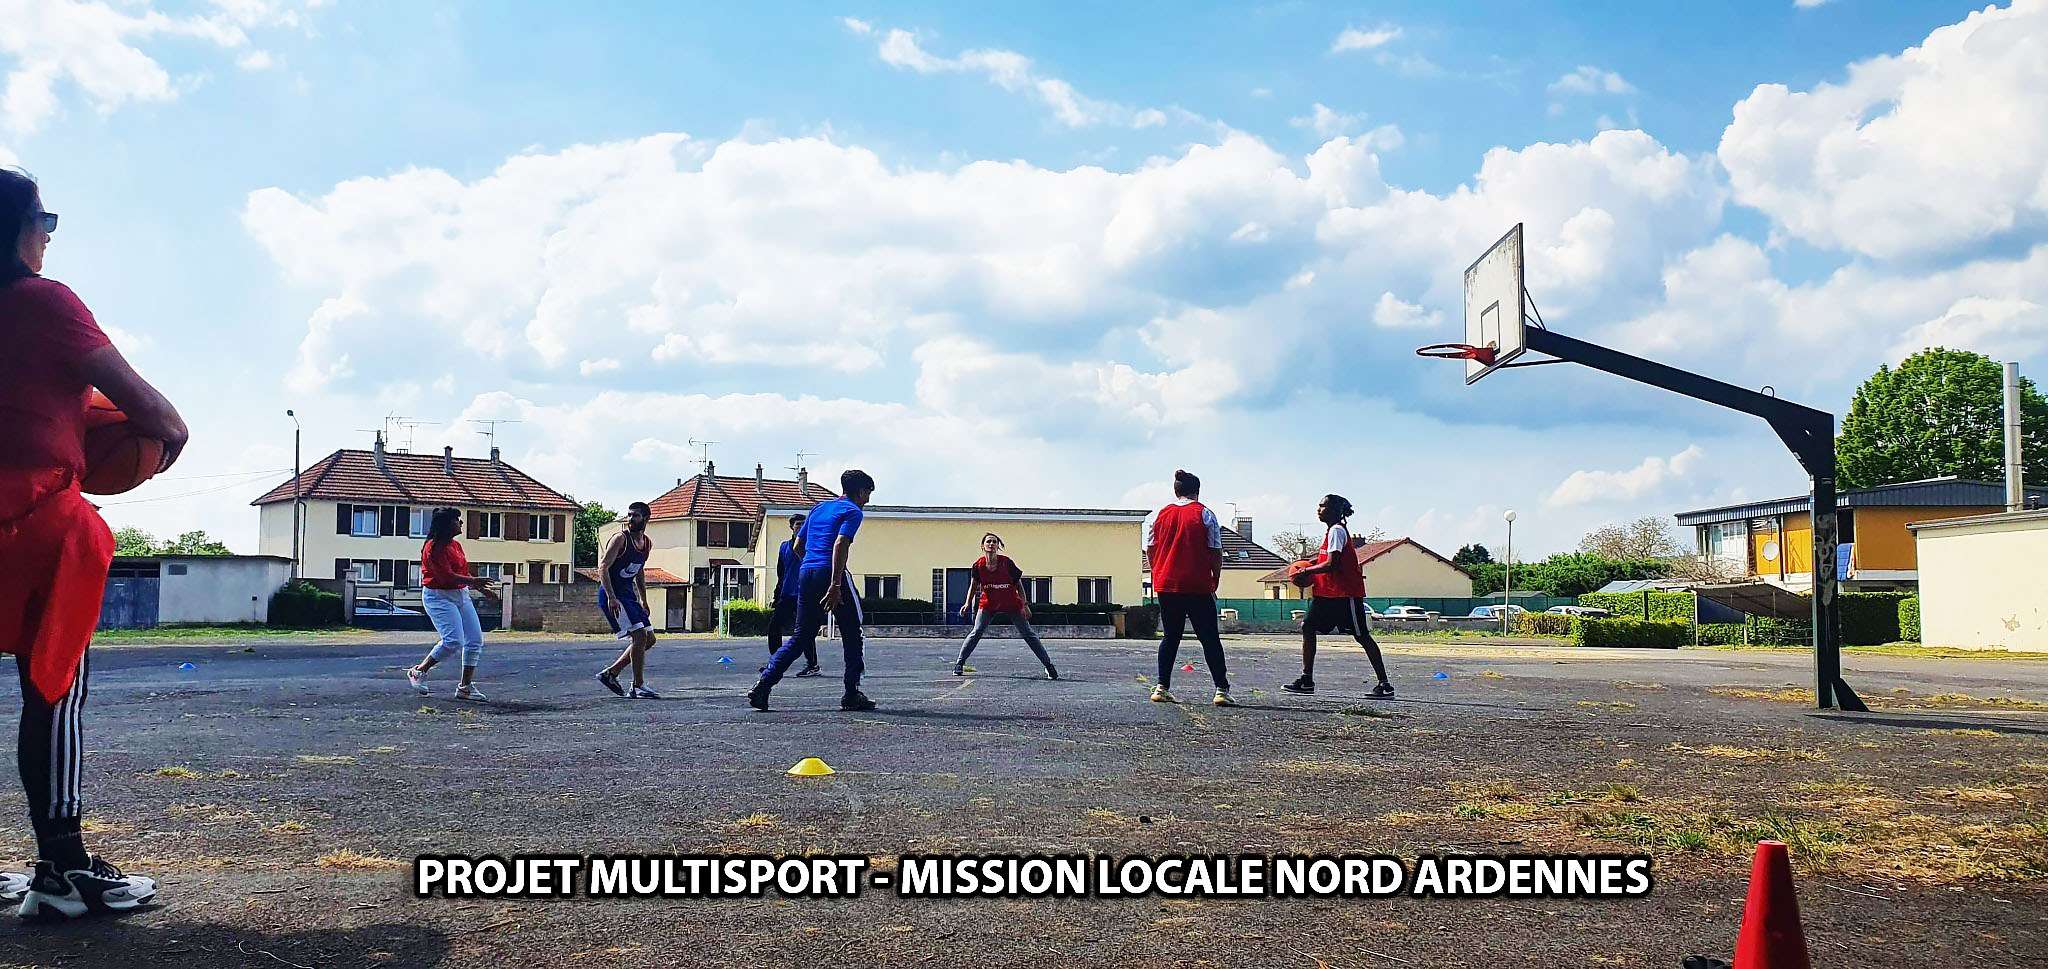 MISSION LOCALE - NORD ARDENNES